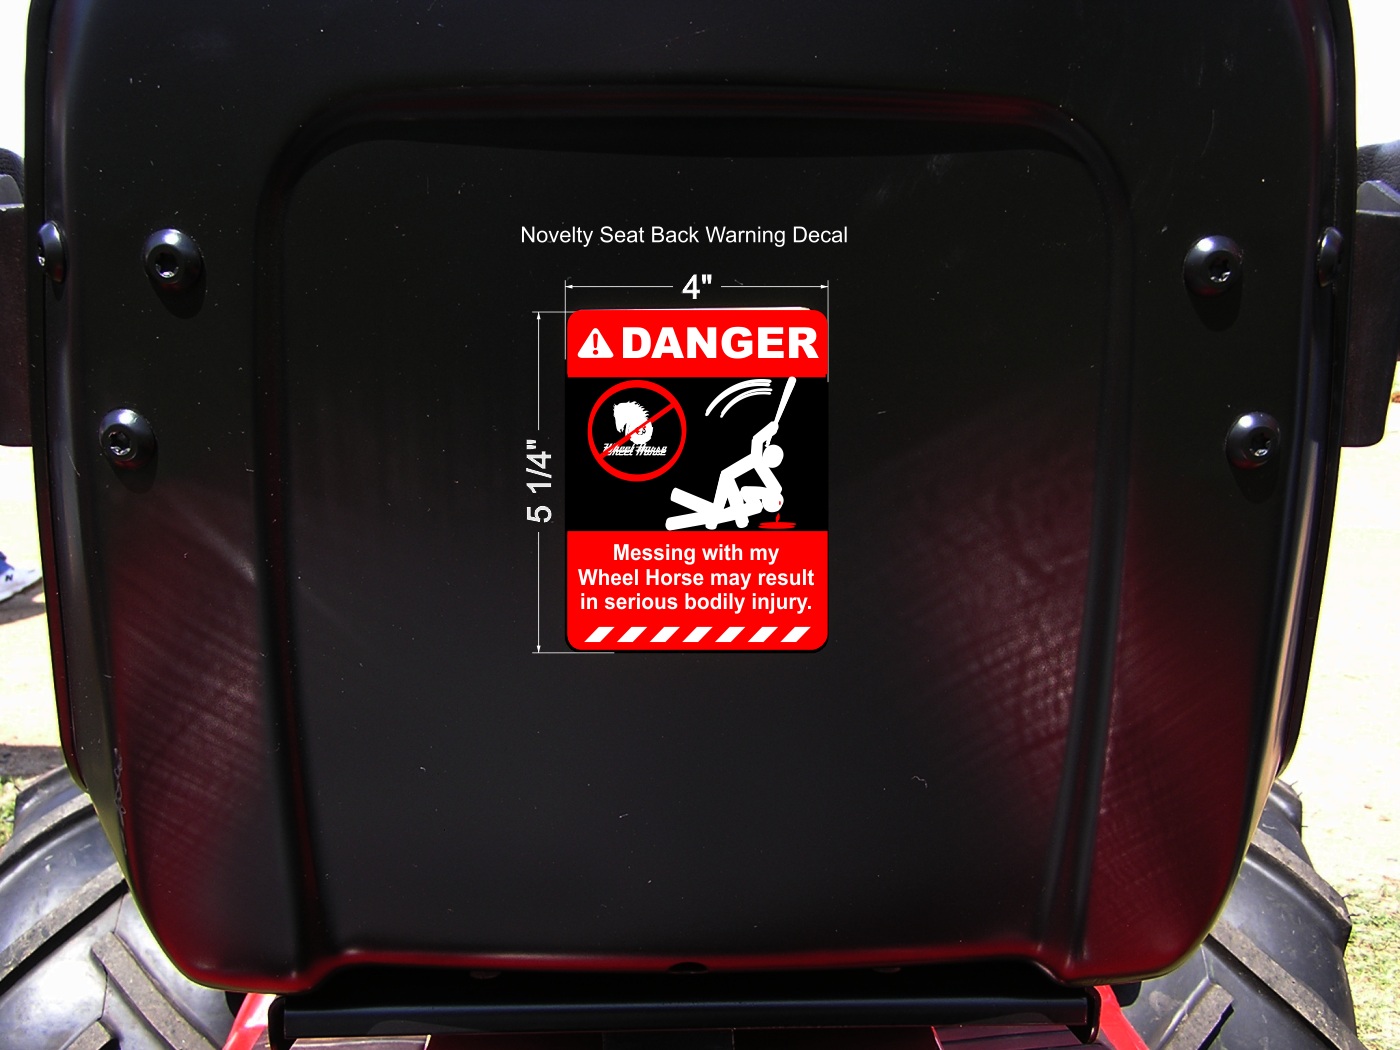 dukes-danger-seat-back-decals.png